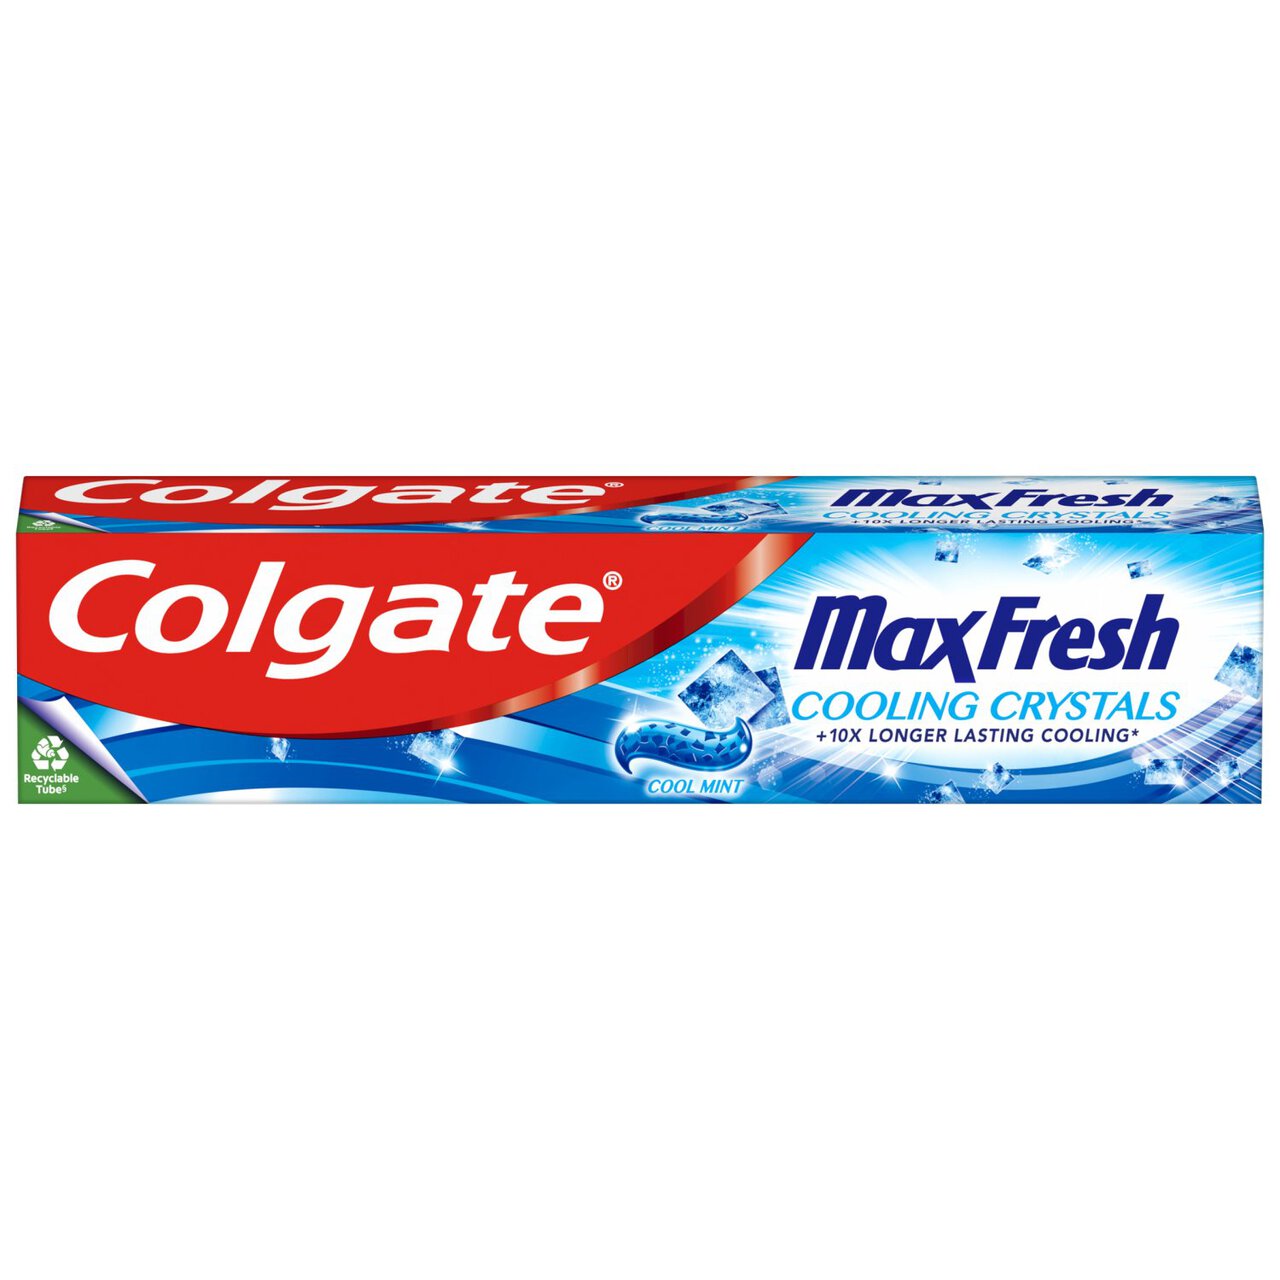 Colgate Max Fresh Cooling Crystals Toothpaste 125ml